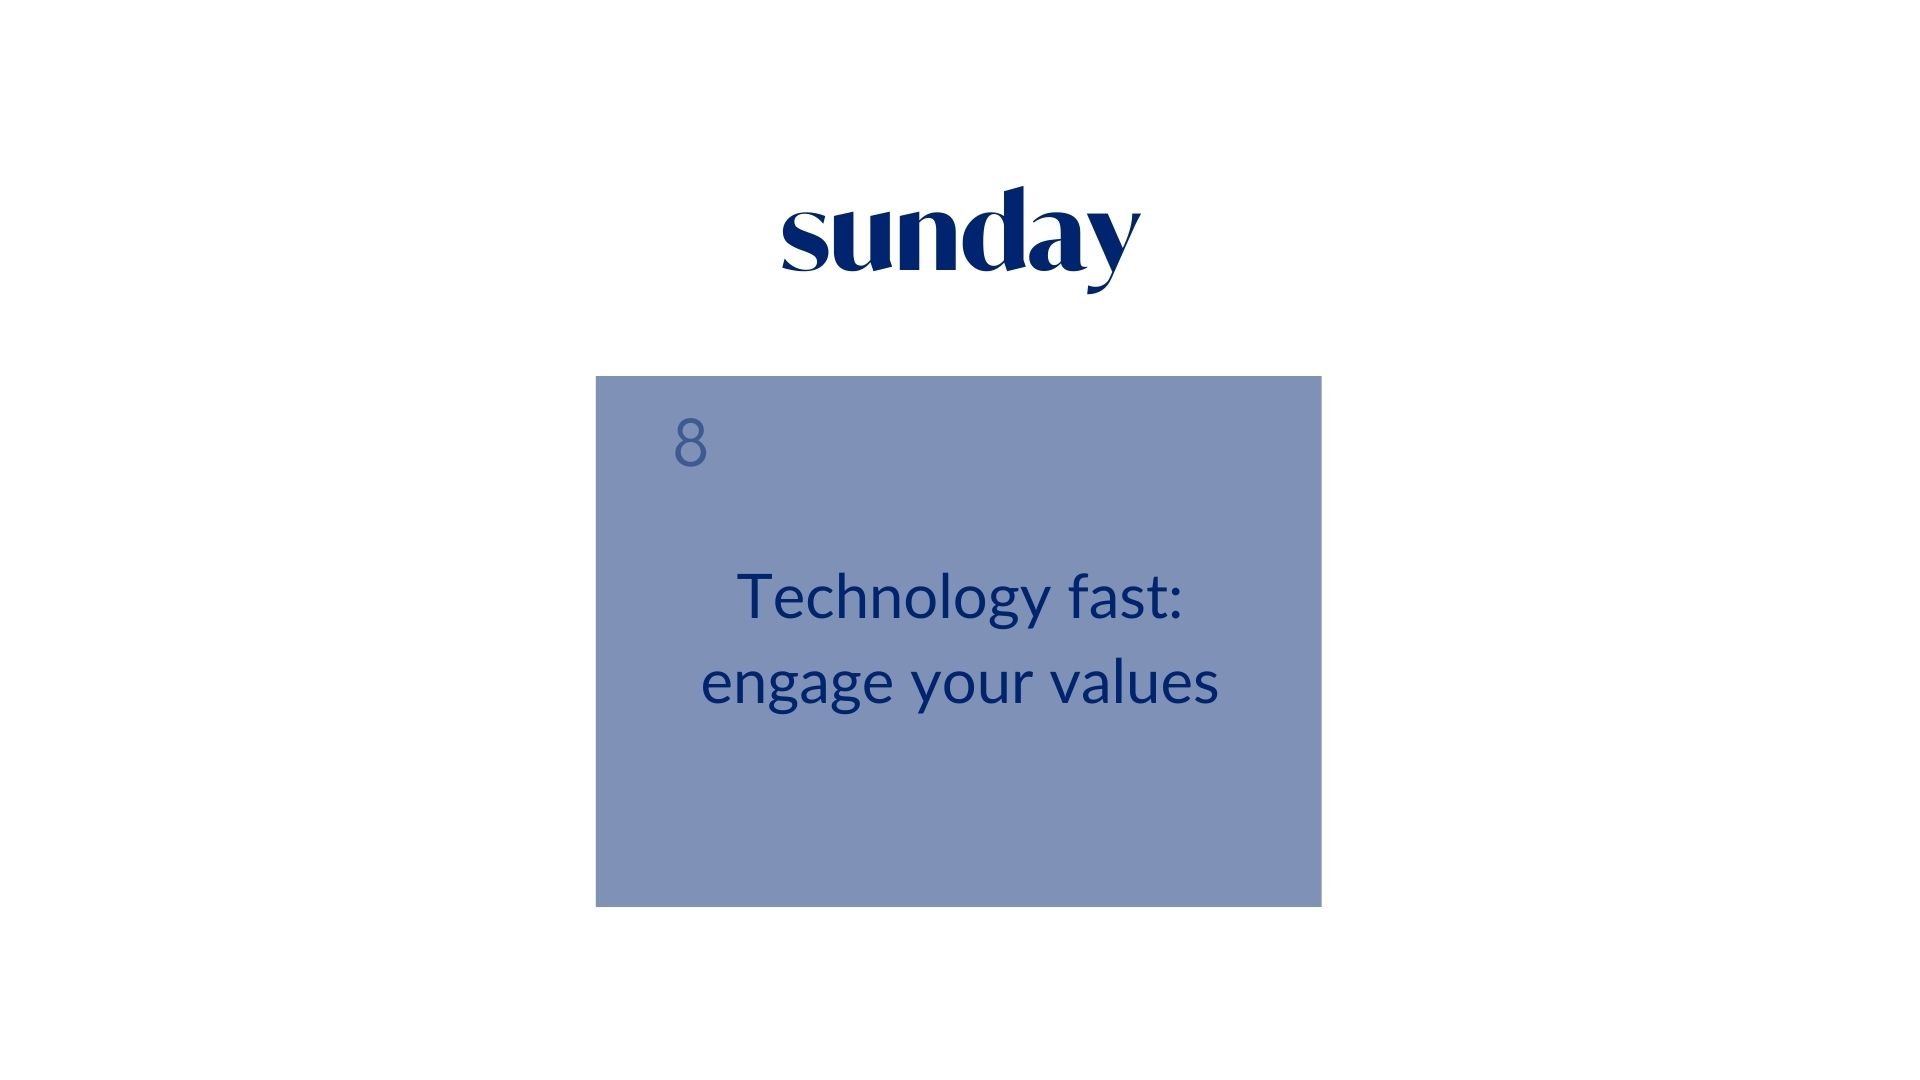 Day 8: Technology fast: engage your values